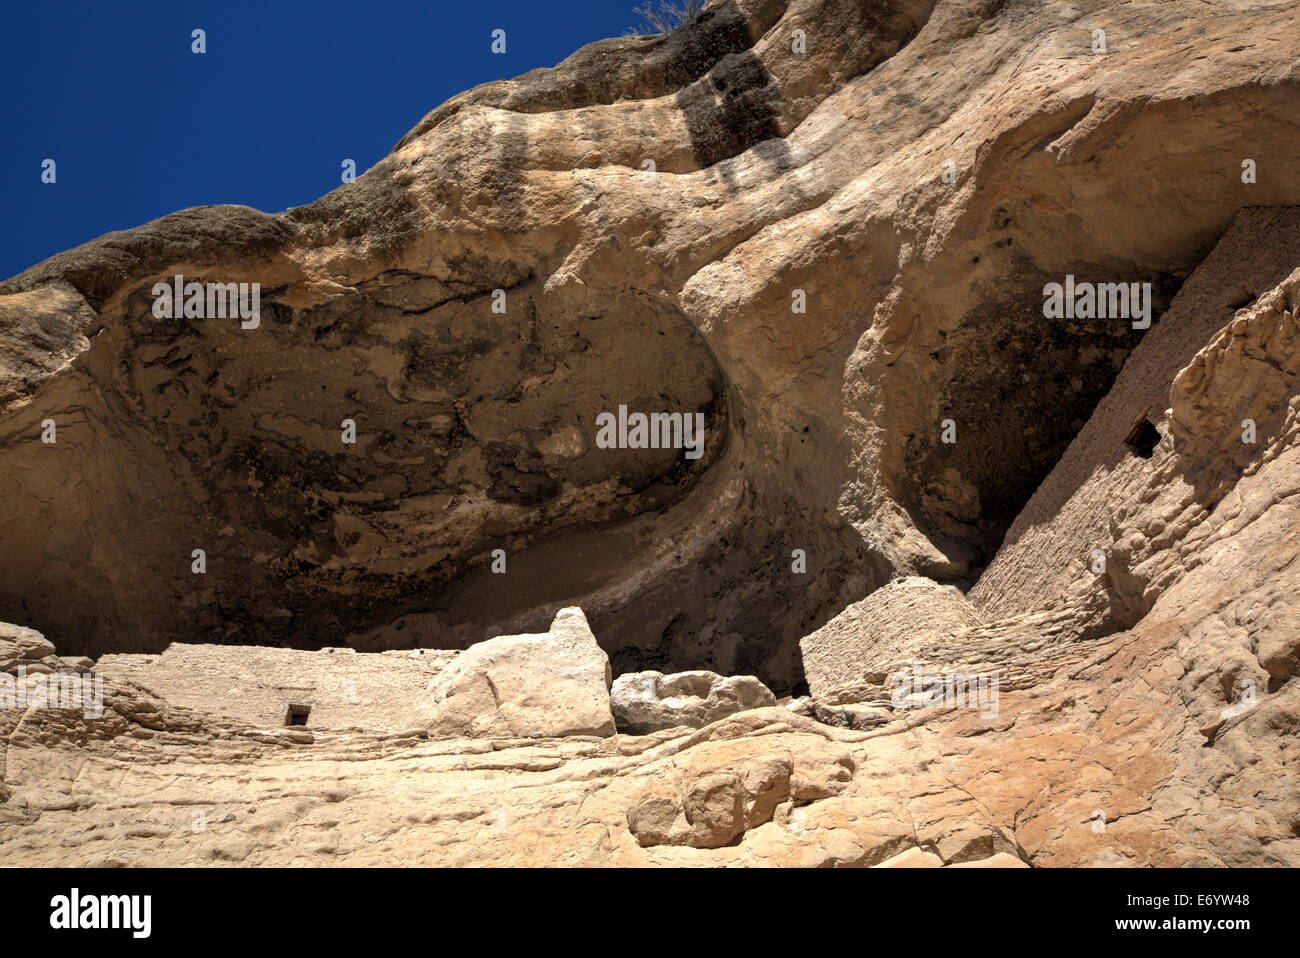 USA, New Mexico, Gila Cliff Dwellings National Monument, constructed over 700 years ago Stock Photo